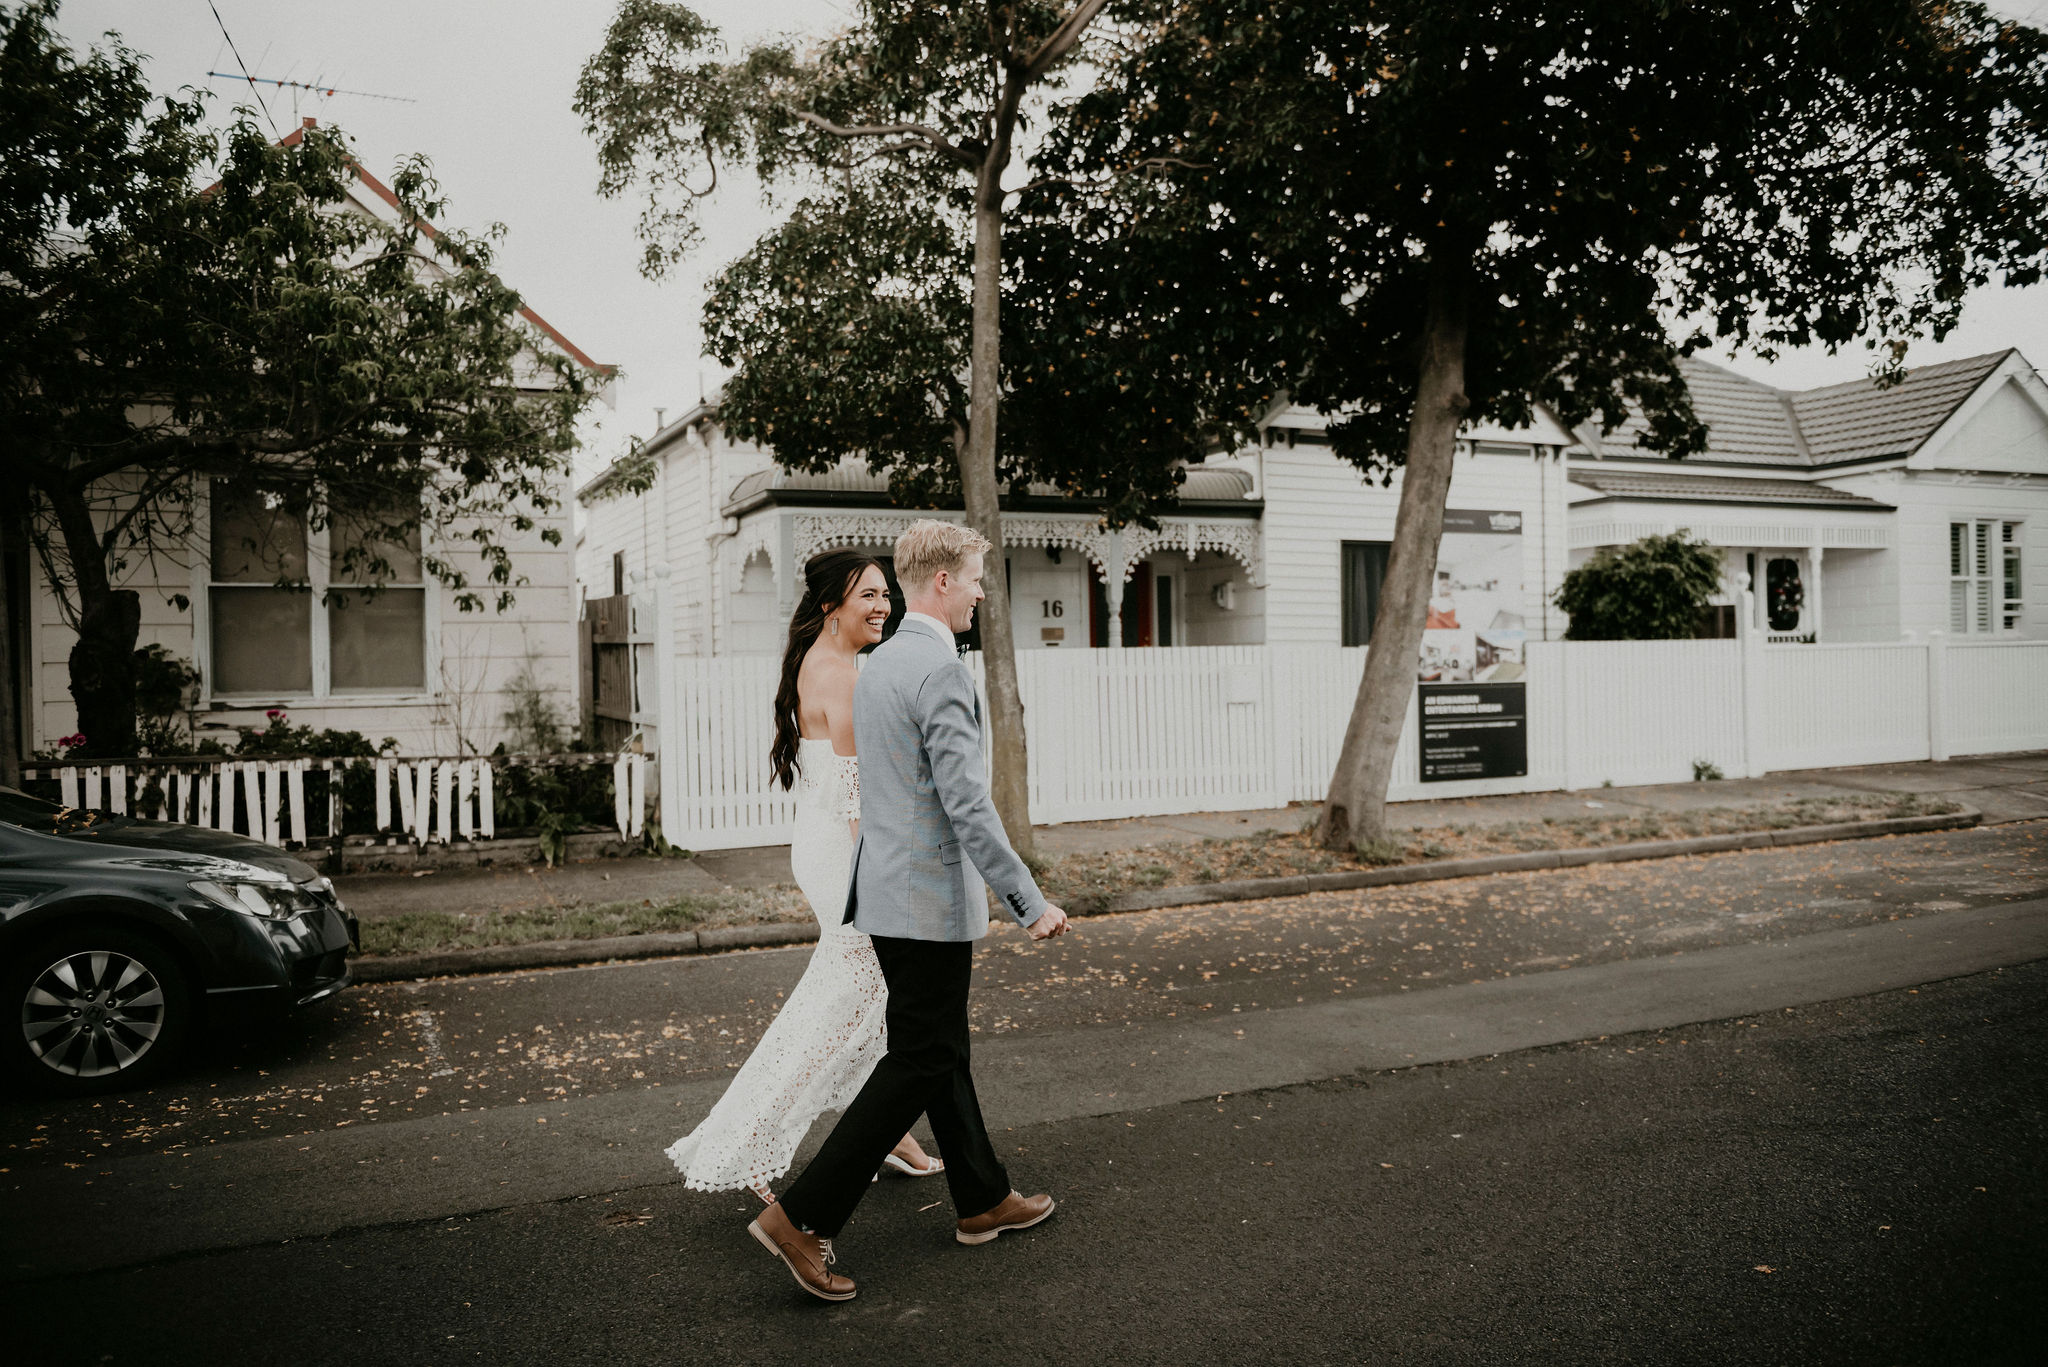 Lets-Elope-Melbourne-Celebrant-Photographer-Elopement-Package-Victoria-Sarah-Matler-Photography-Elope-at-Home-Footscray-weddings-intimate-19